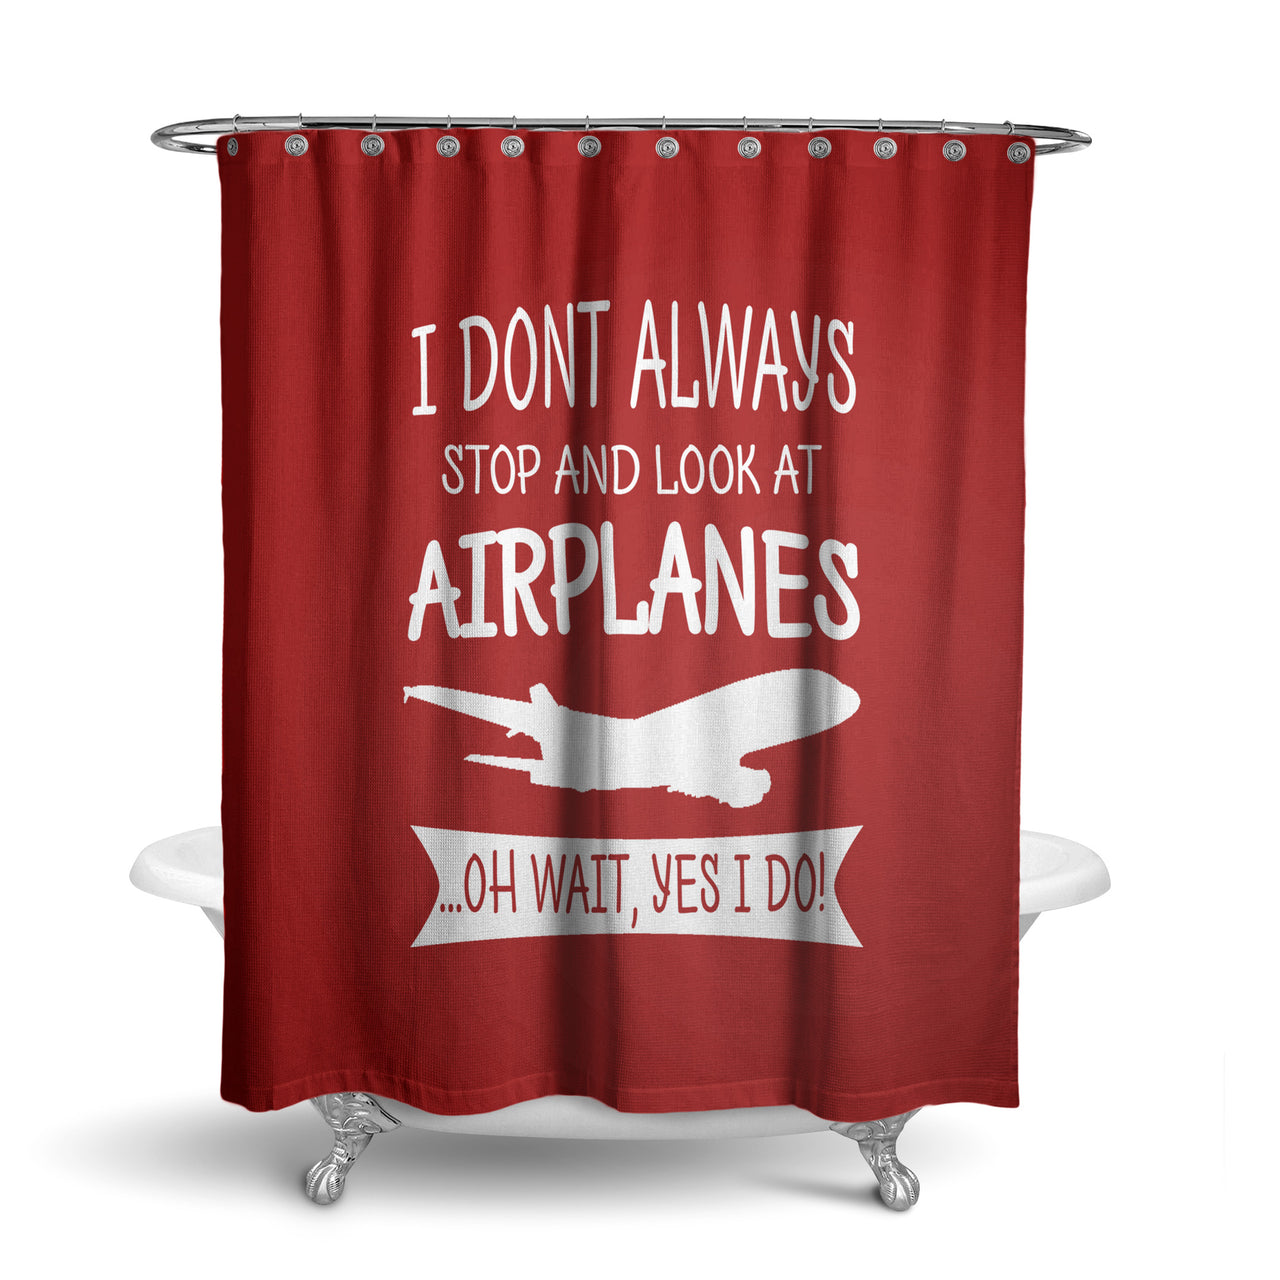 I Don't Always Stop and Look at Airplanes Designed Shower Curtains